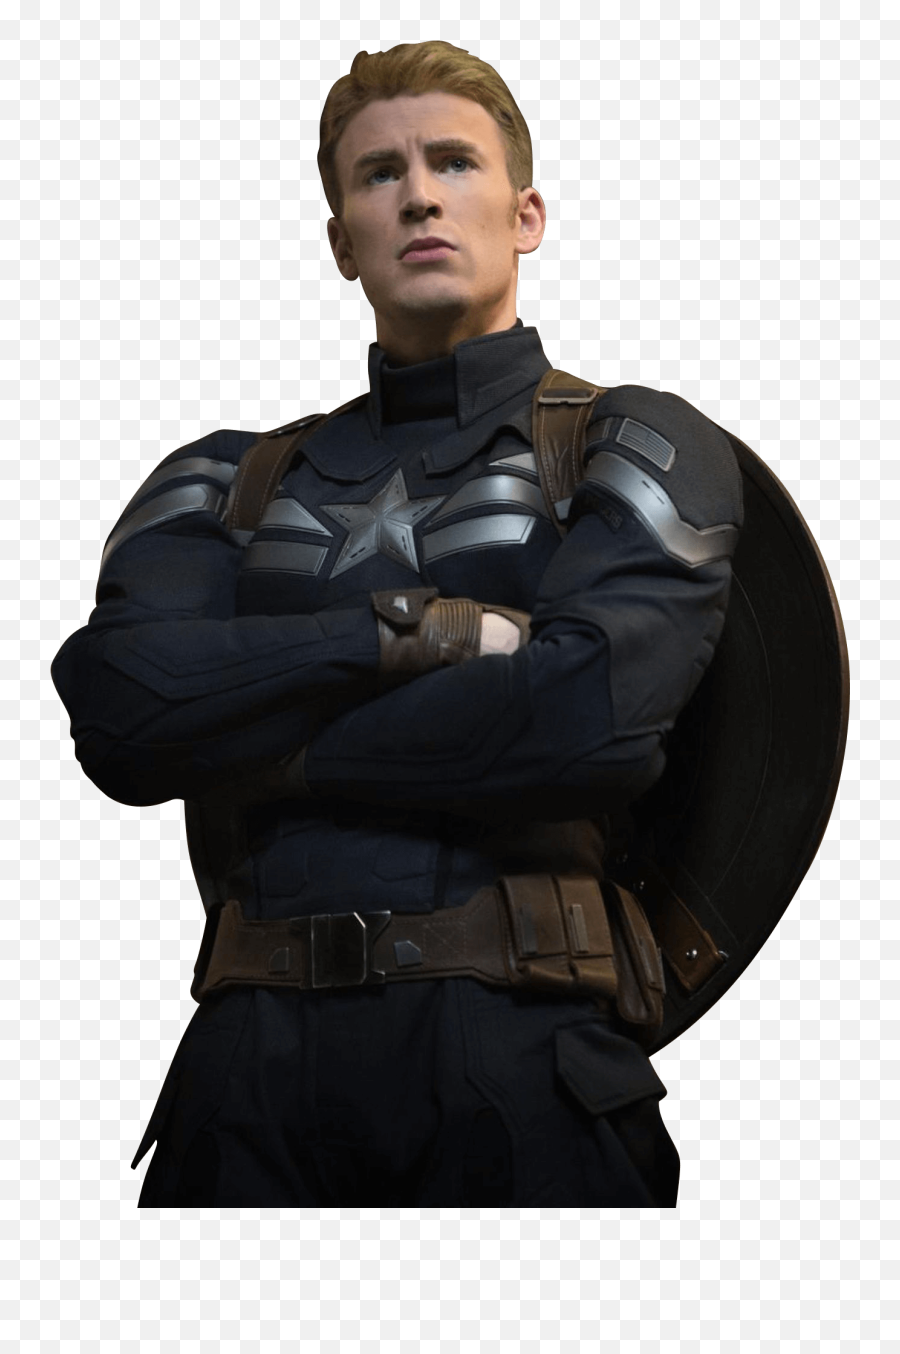 Captain America Png Image Free Download - Captain America The Winter Soldiers,Captain America Png